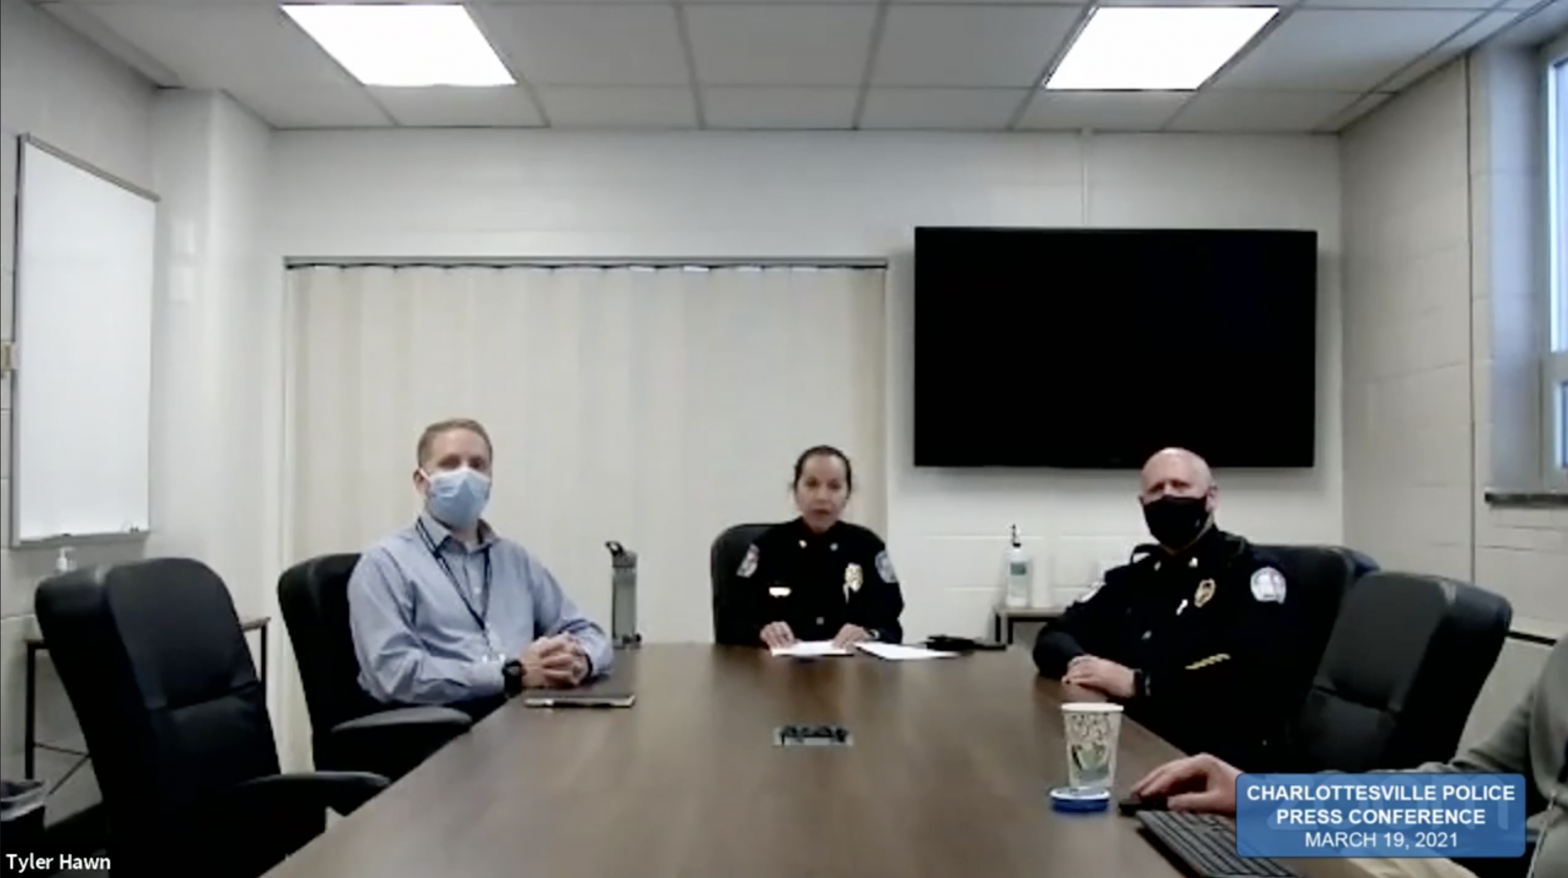 Charlottesville Police Chief RaShall Brackney sits with Major Jim Mooney and Sergeant Greg Wade at a table during Friday’s virtual press conference